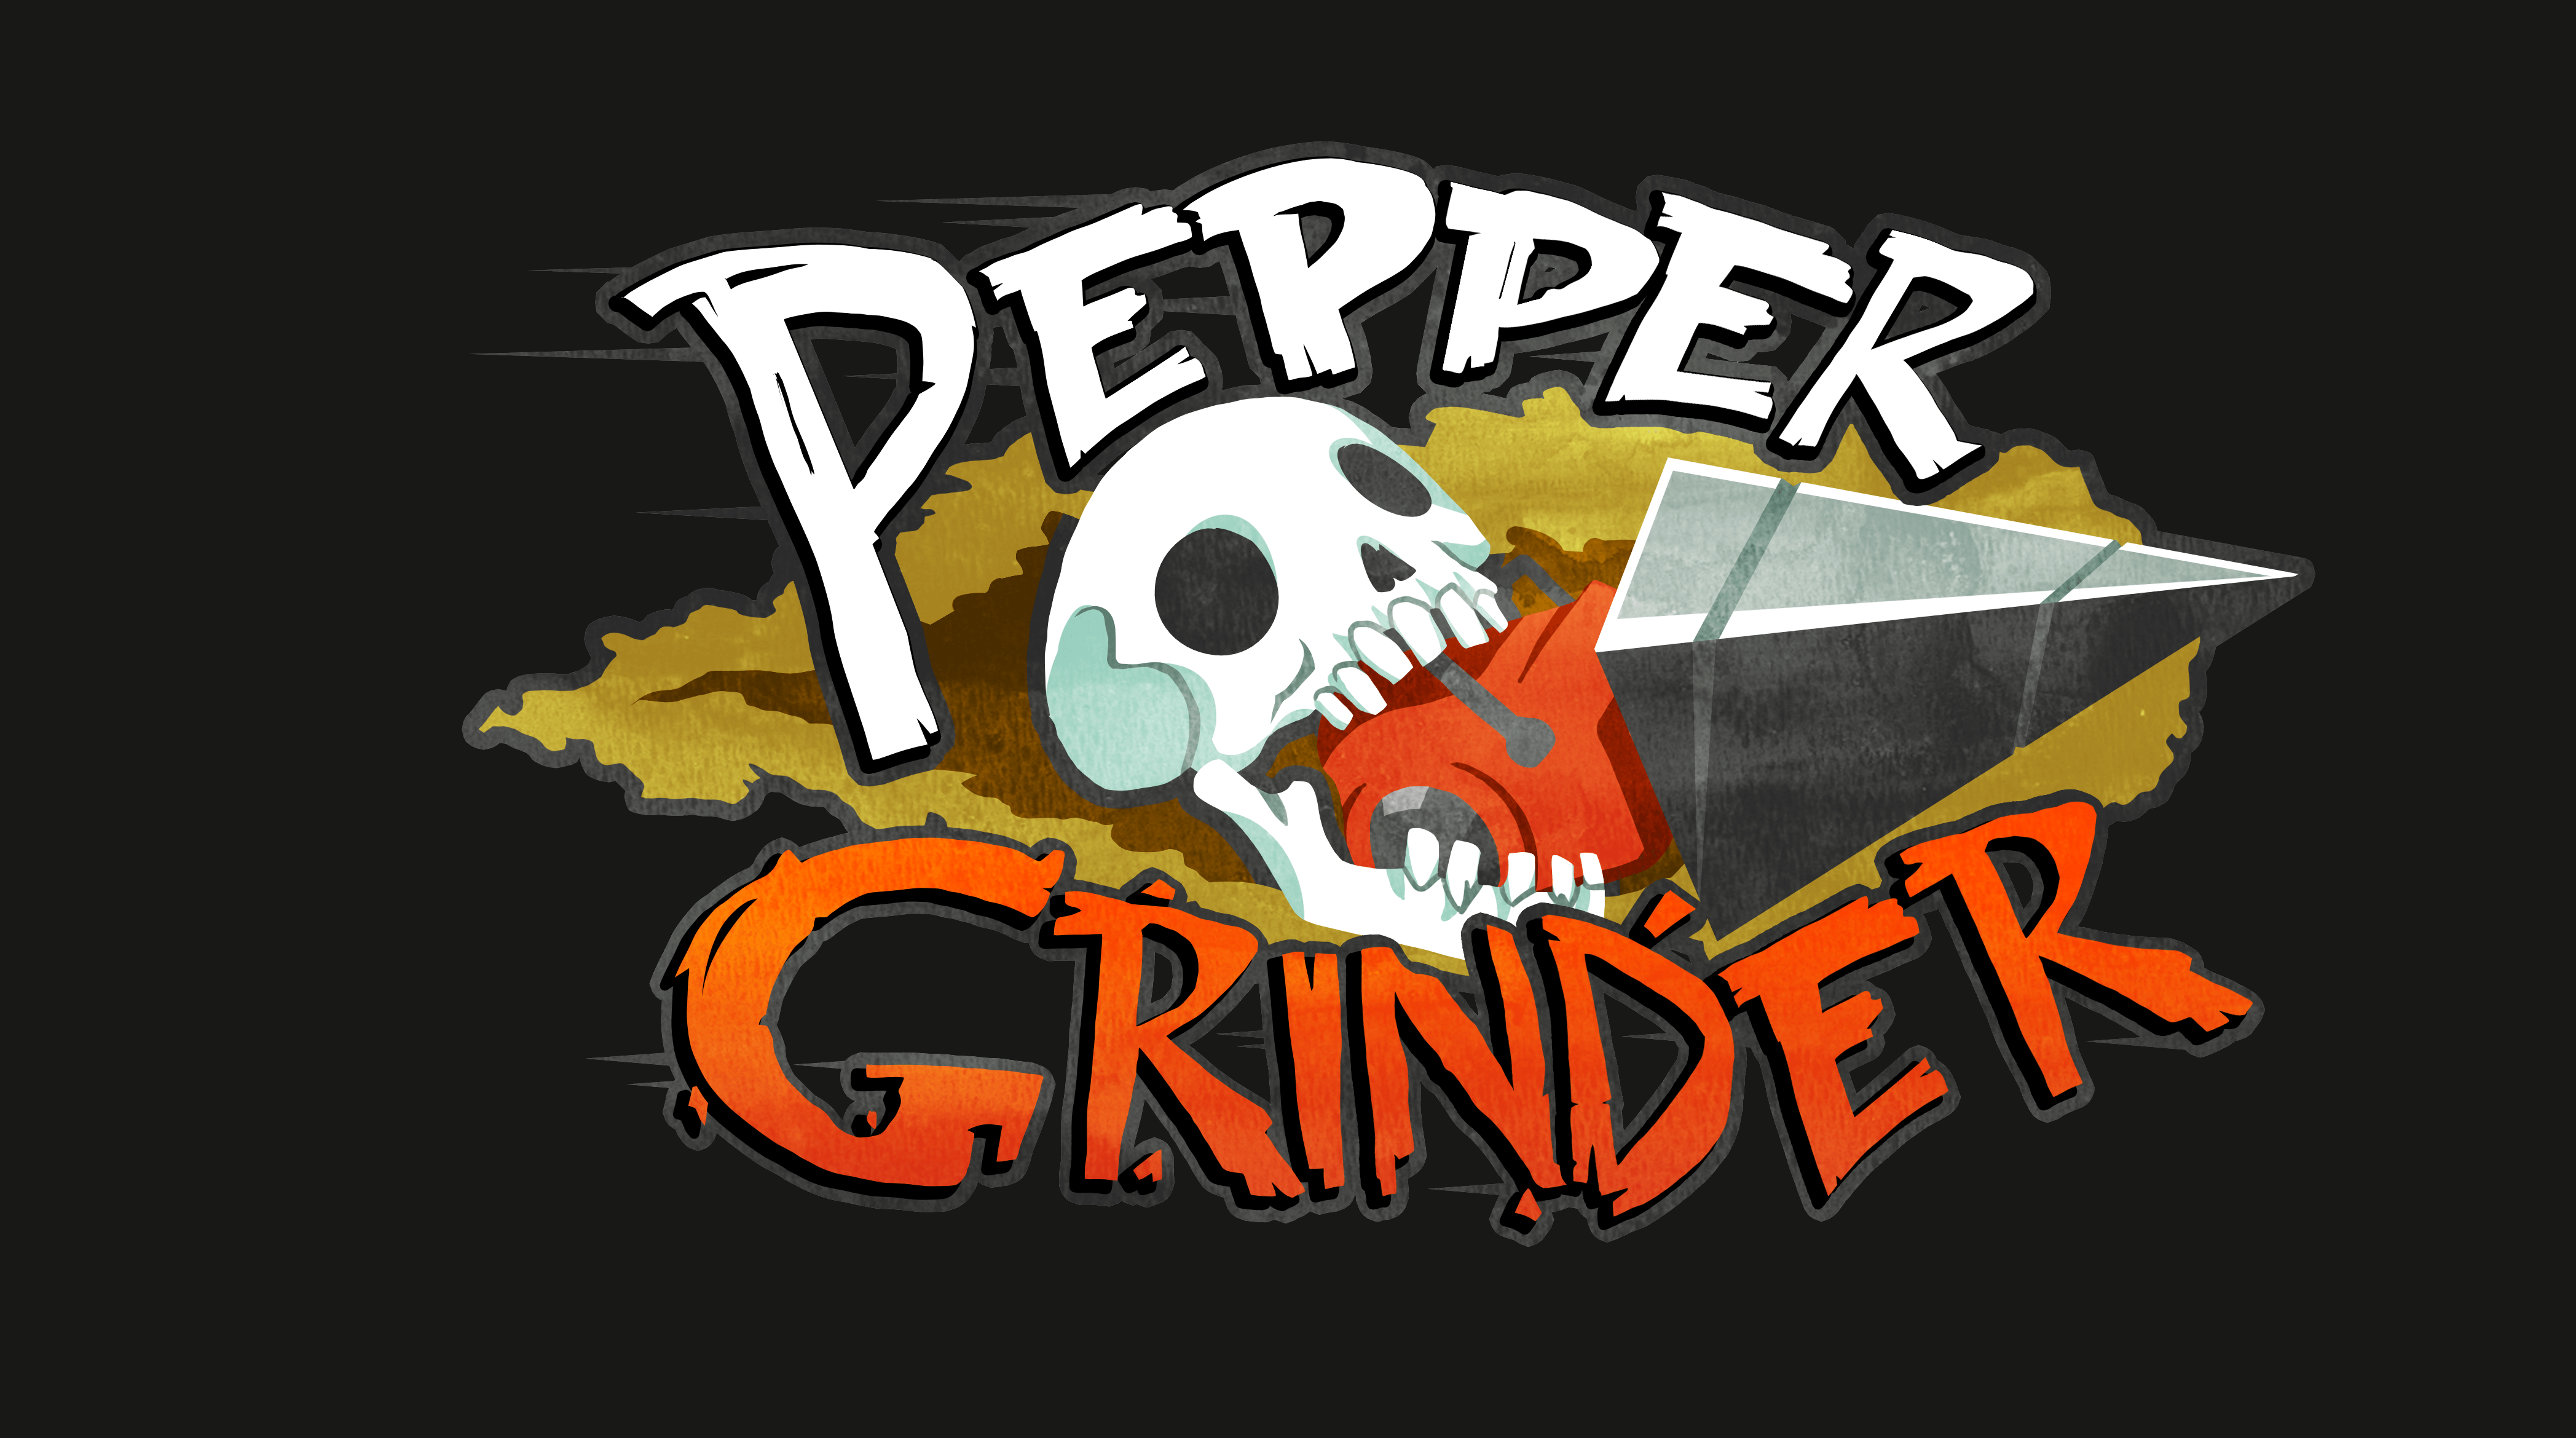 The Grinder Wallpapers